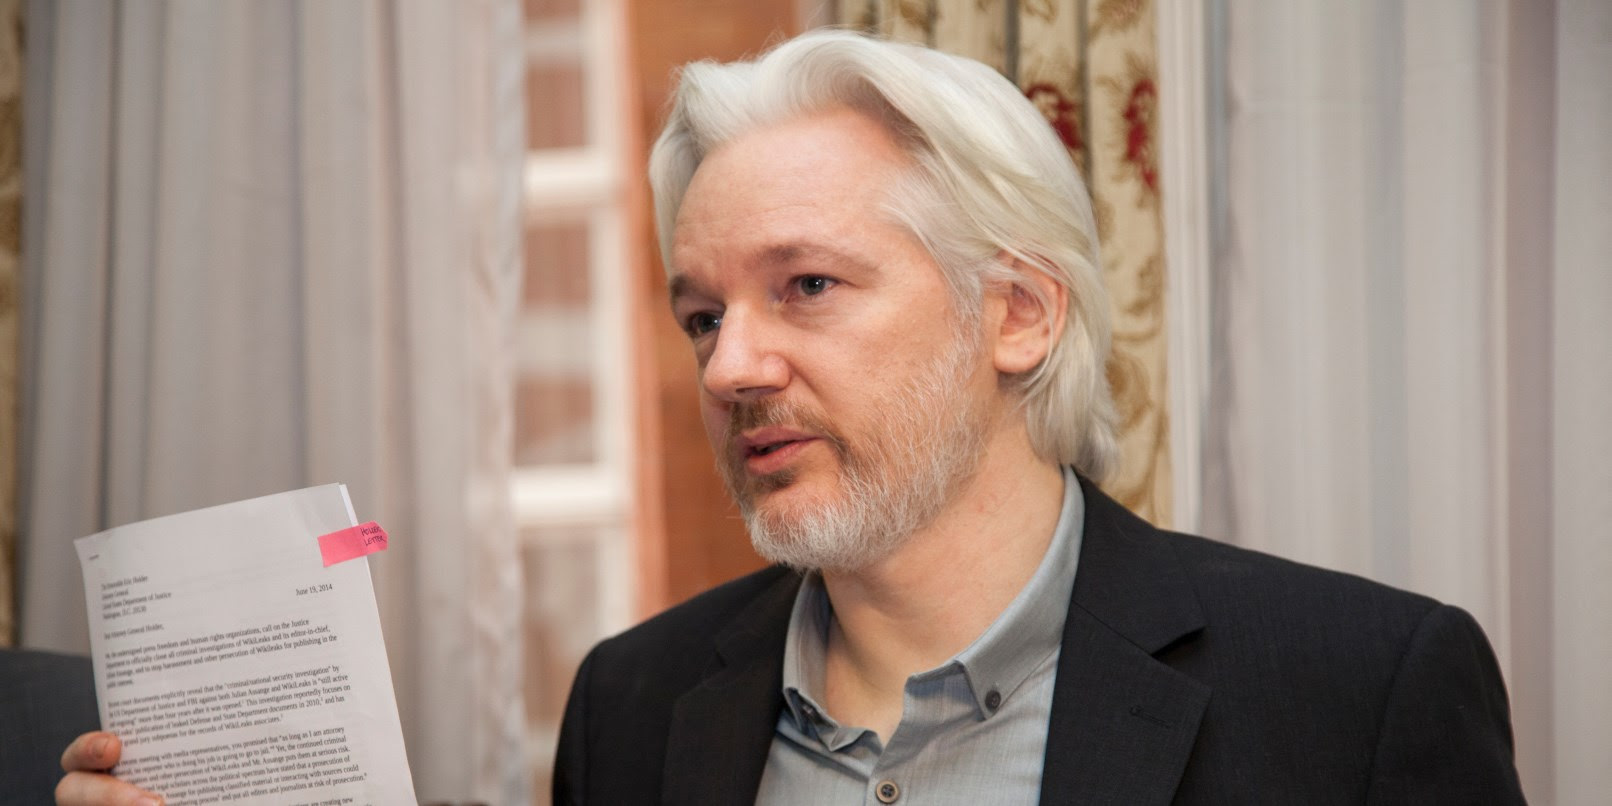 Julian Assange Says Trump Won't Be Allowed to Win, 'Clinton & ISIS Are Funded By the Same Money' +Video